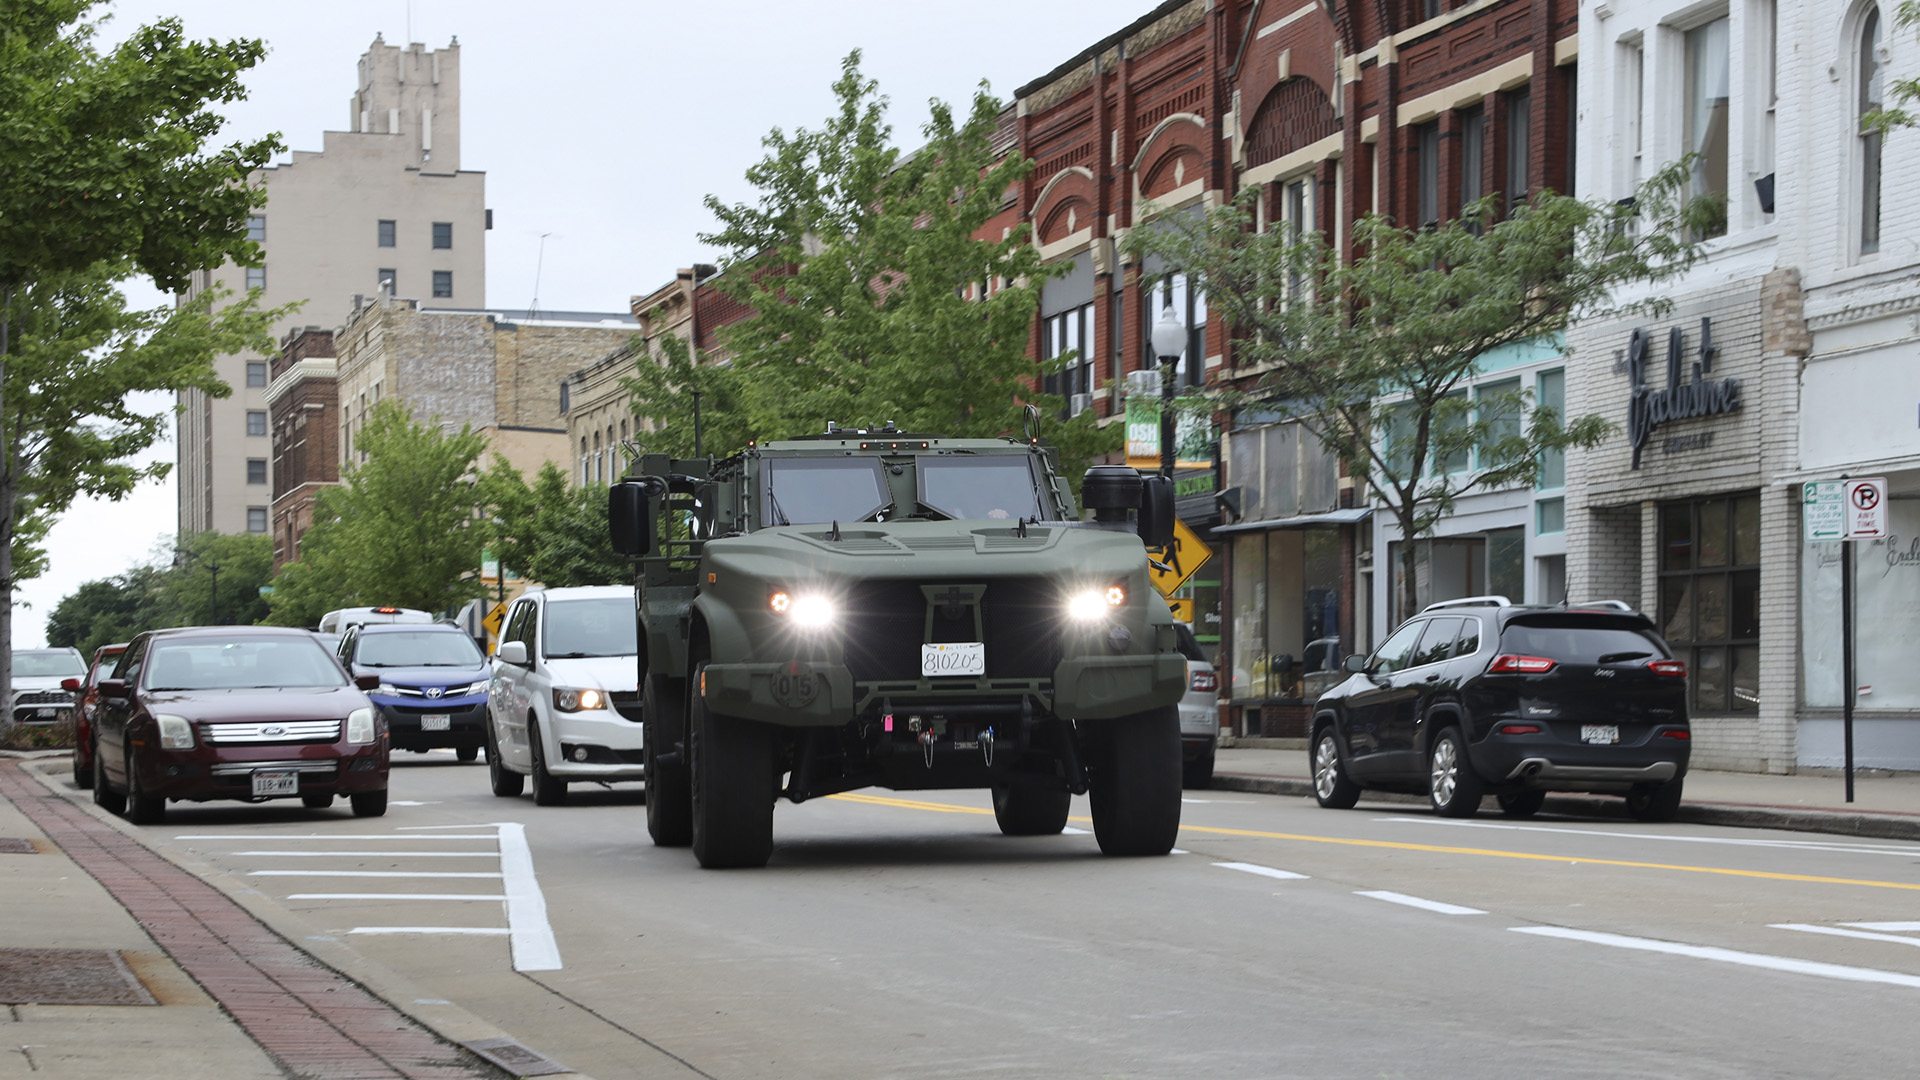 A military vehicle drives down a city street with other vehicles driving and parked and a row of brick storefronts in the background.